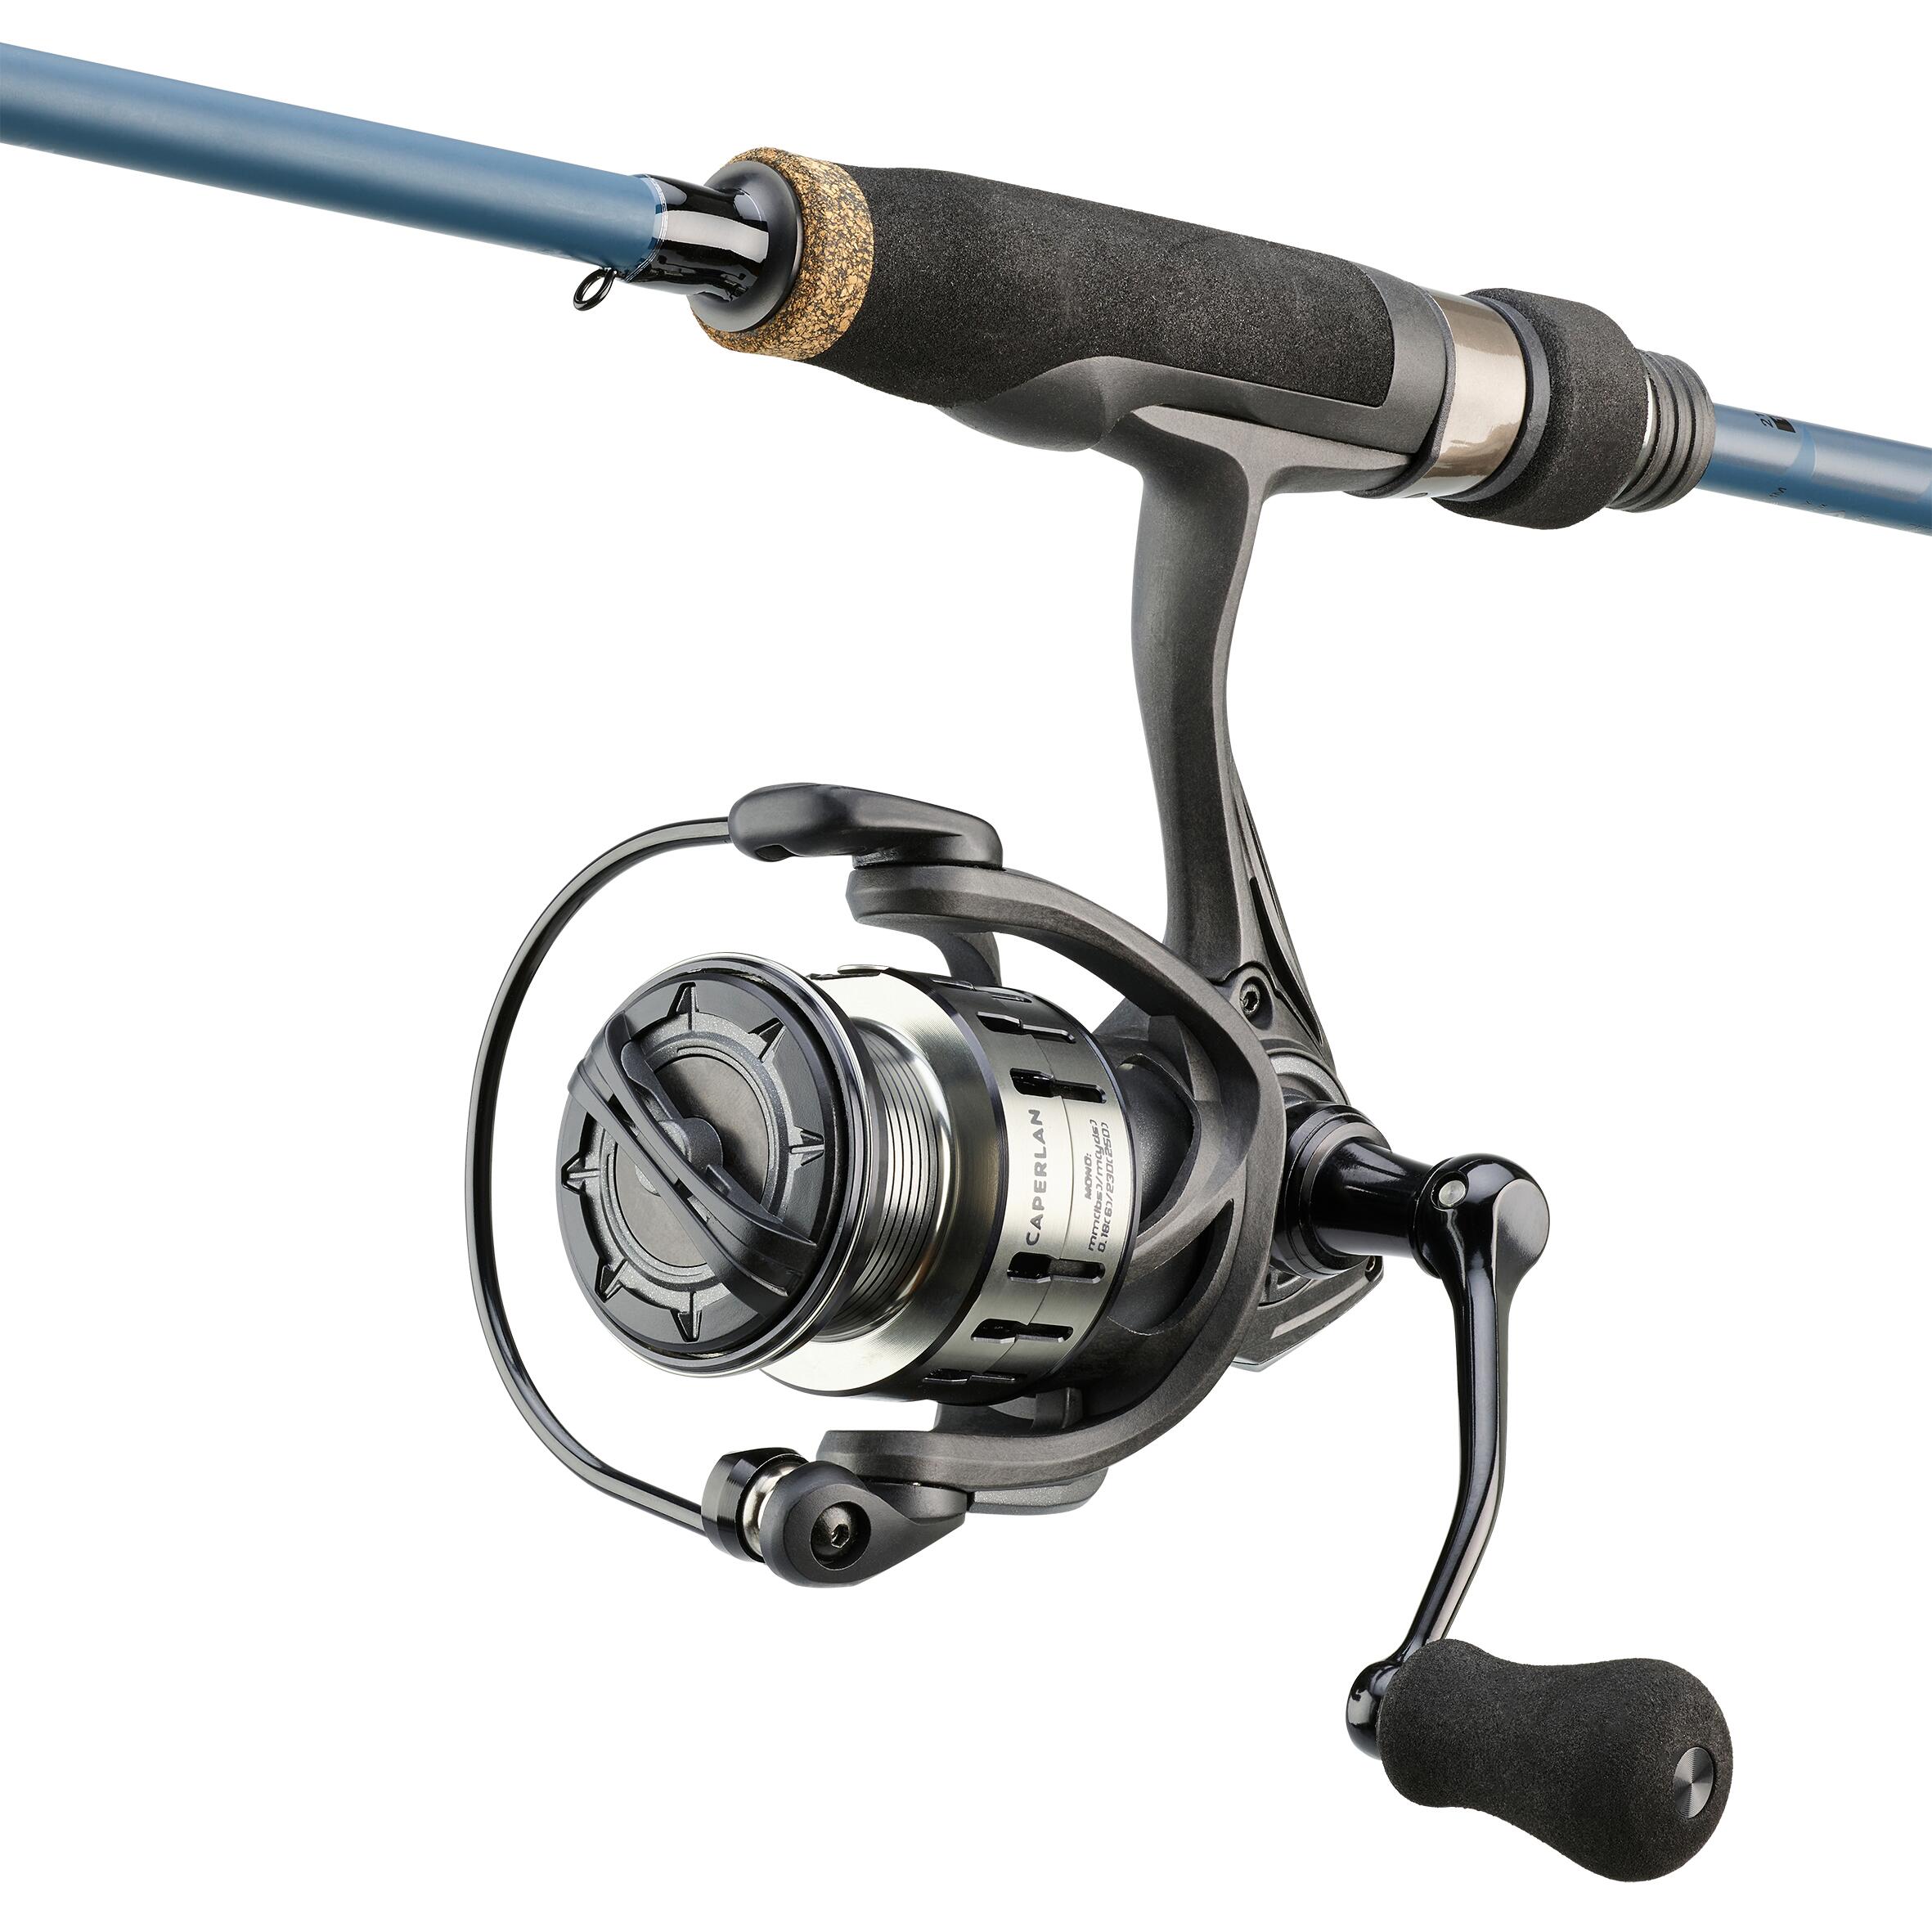 WXM-5 210 MH combo lure fishing rod and reel - black, Dark blue